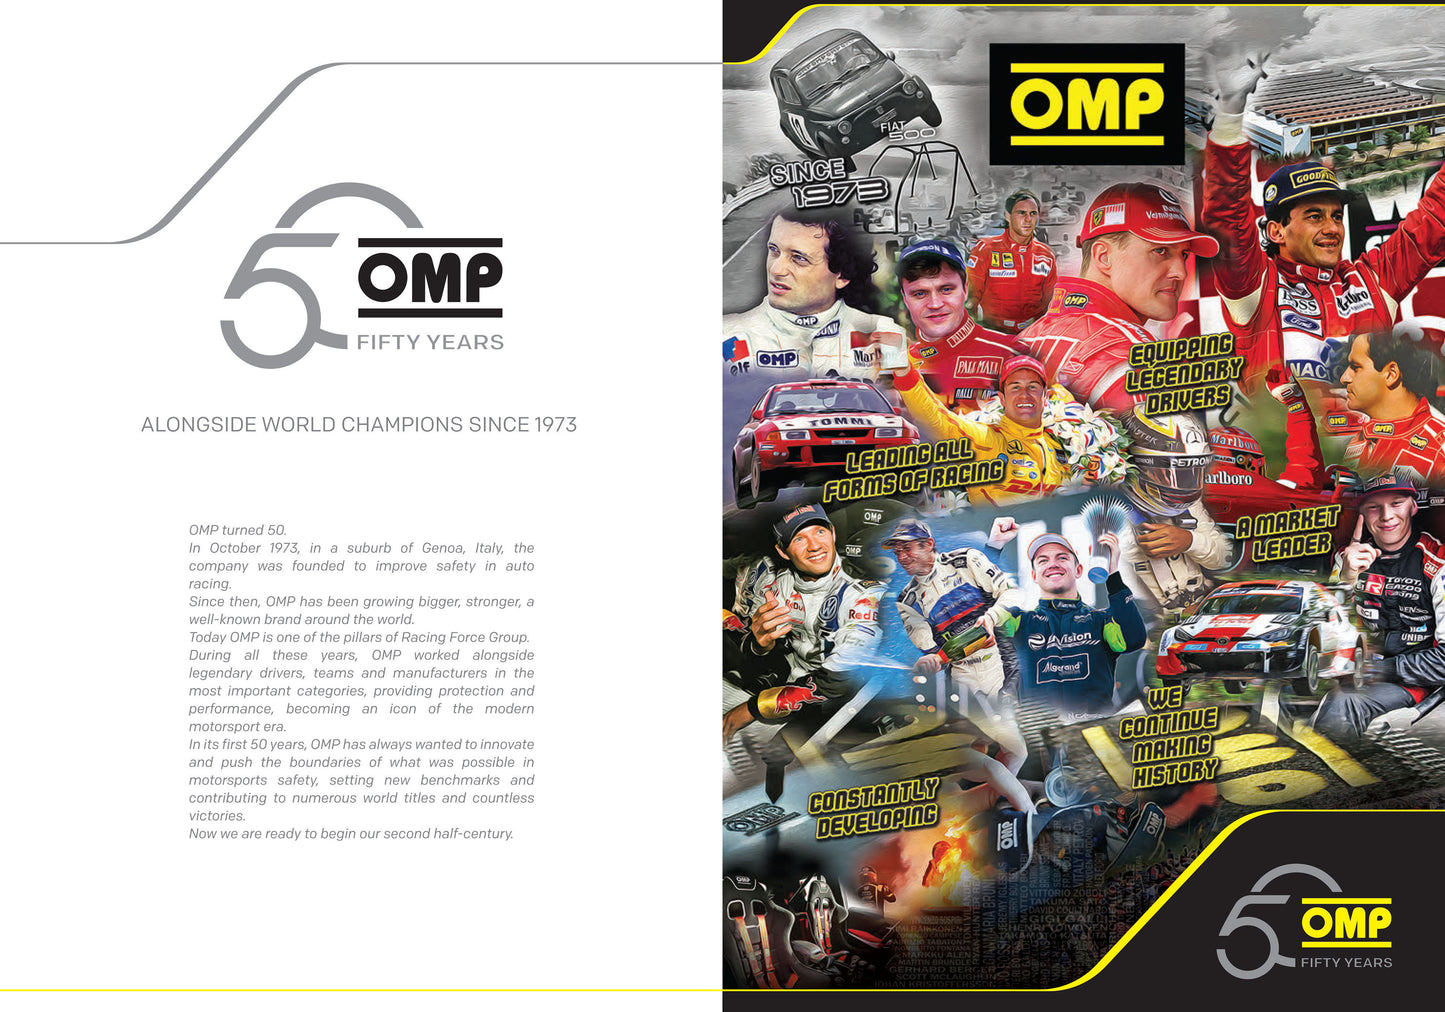 OMP Pro Mech-S Mechanic Gloves Fireproof Racing Rally Pitcrew FIA Approved